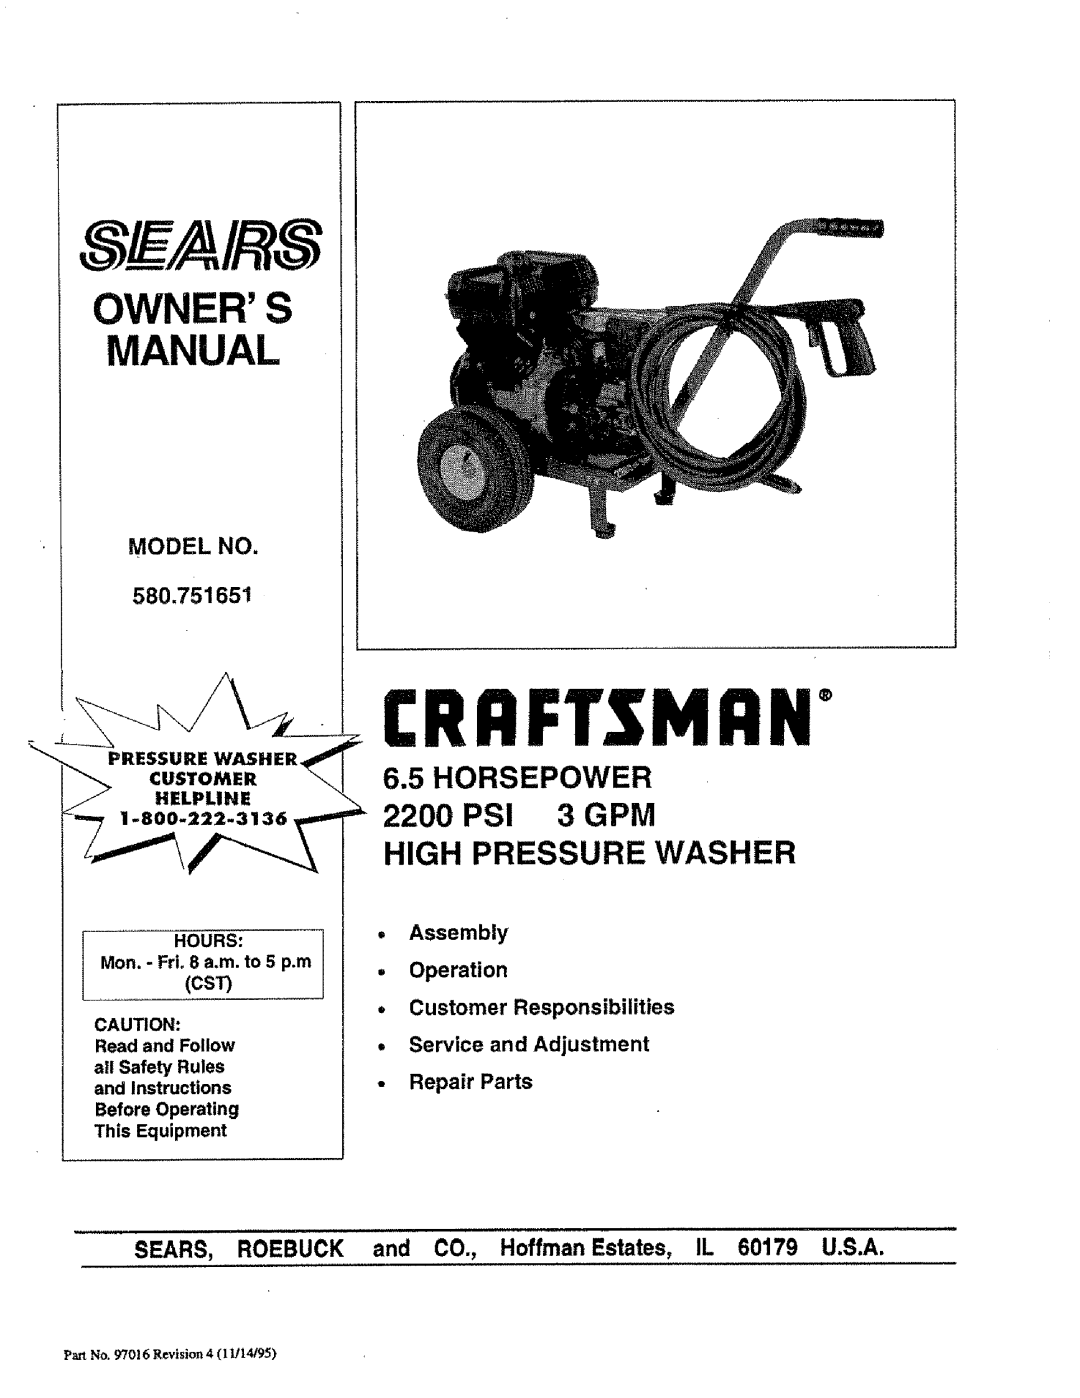 Craftsman 580.751651 owner manual MODEL NO 580.75165, Crrftsmrn, Owners Manual, Horsepower, _ Custome, 2200PSI, 3GPM 